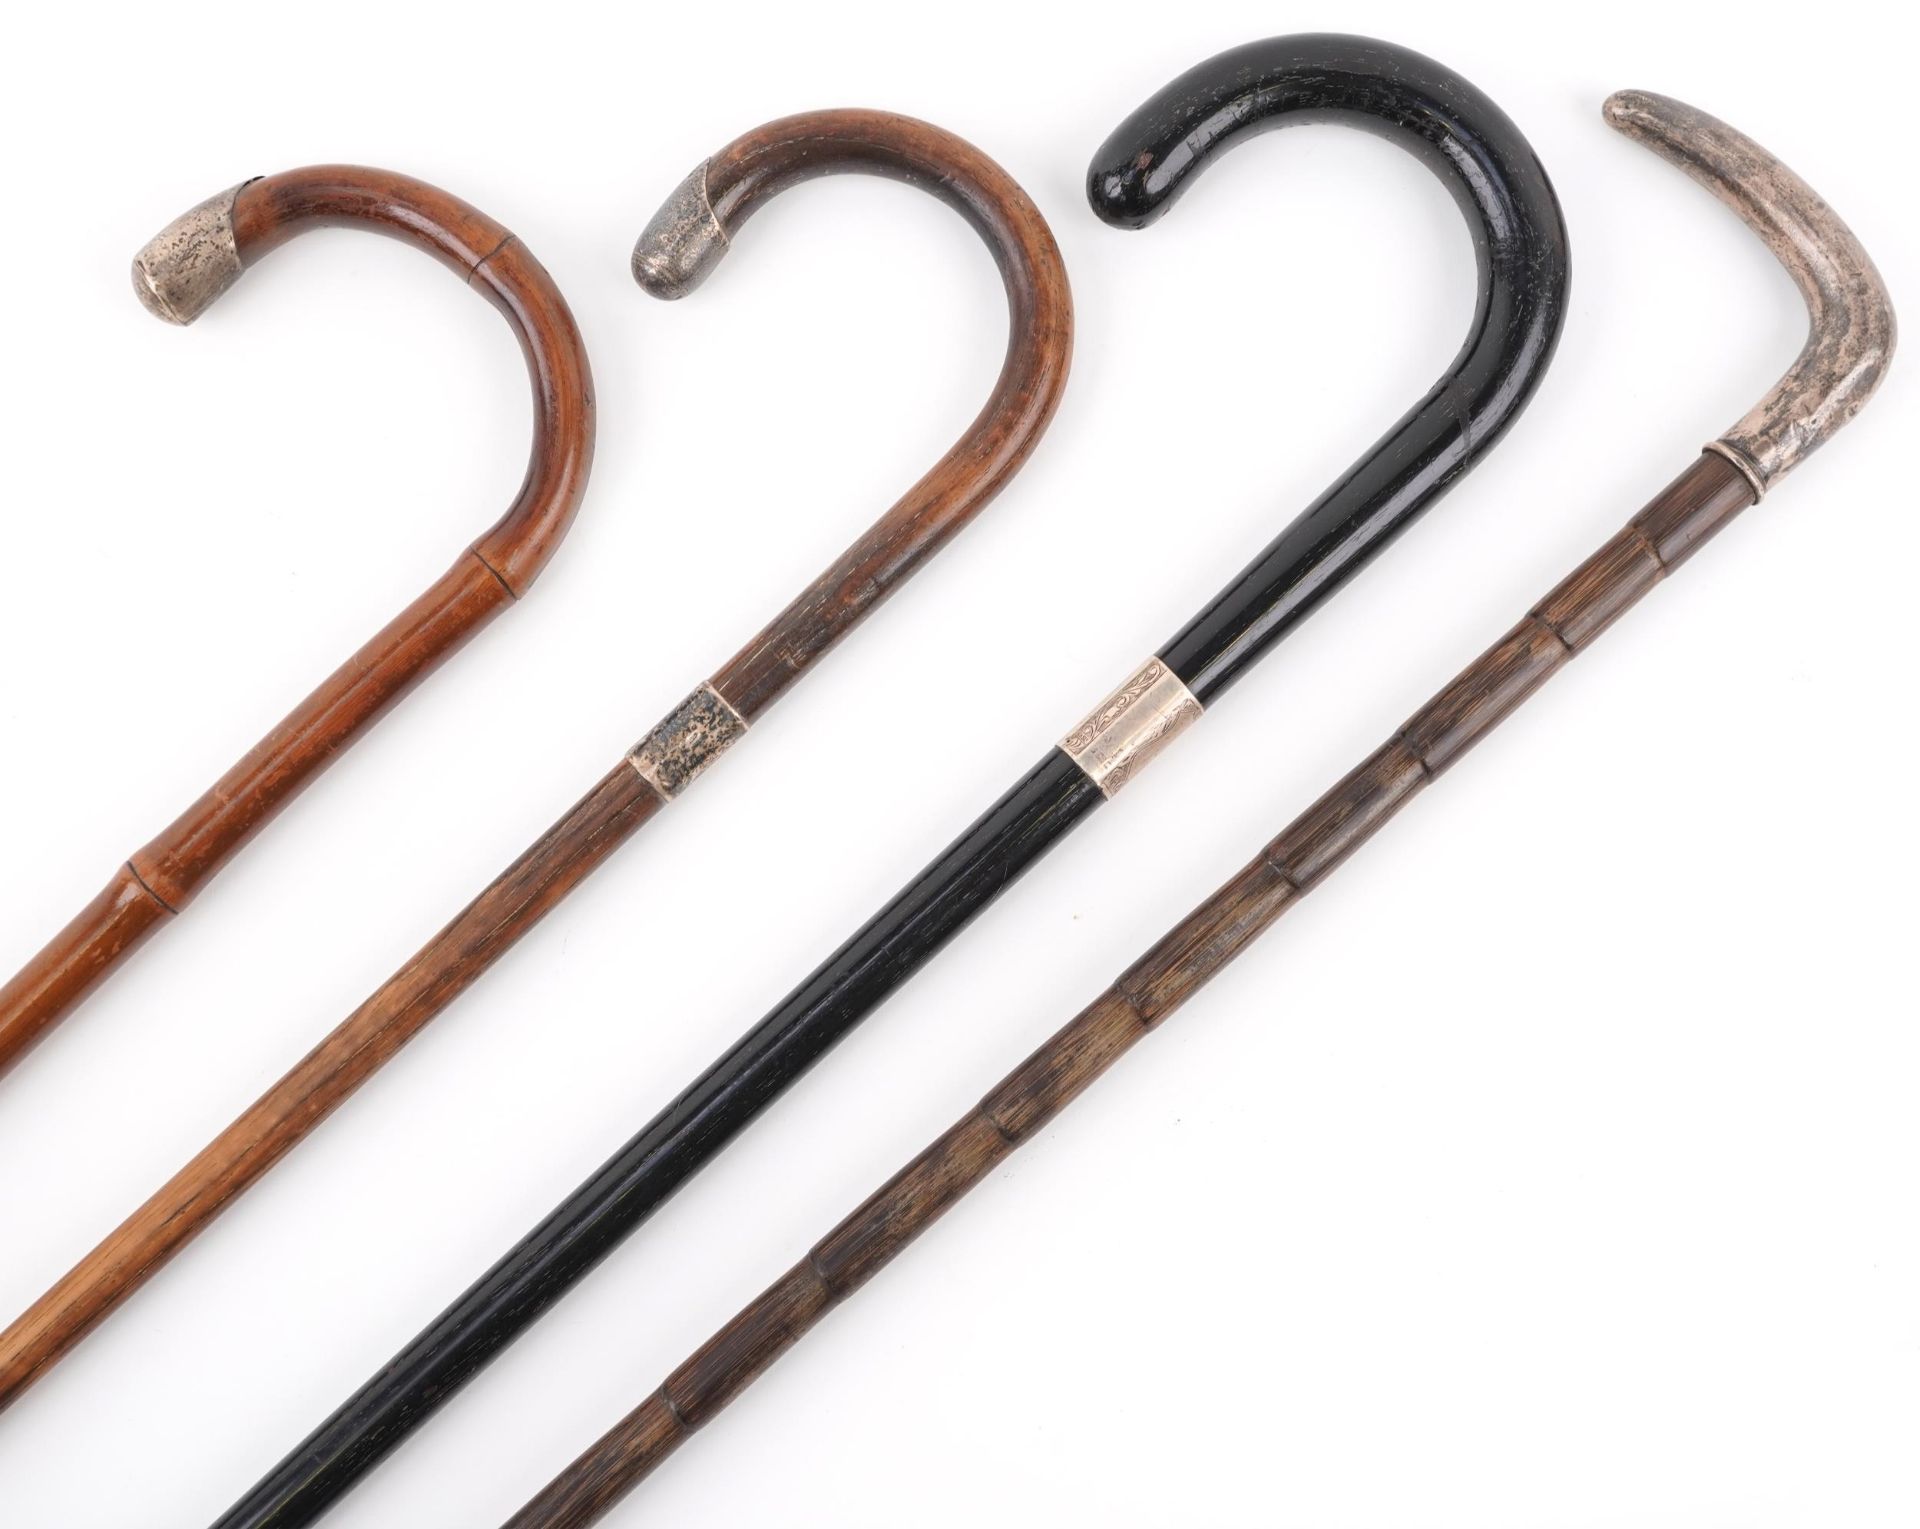 Four silver mounted wooden walking sticks, the largest 90cm in length